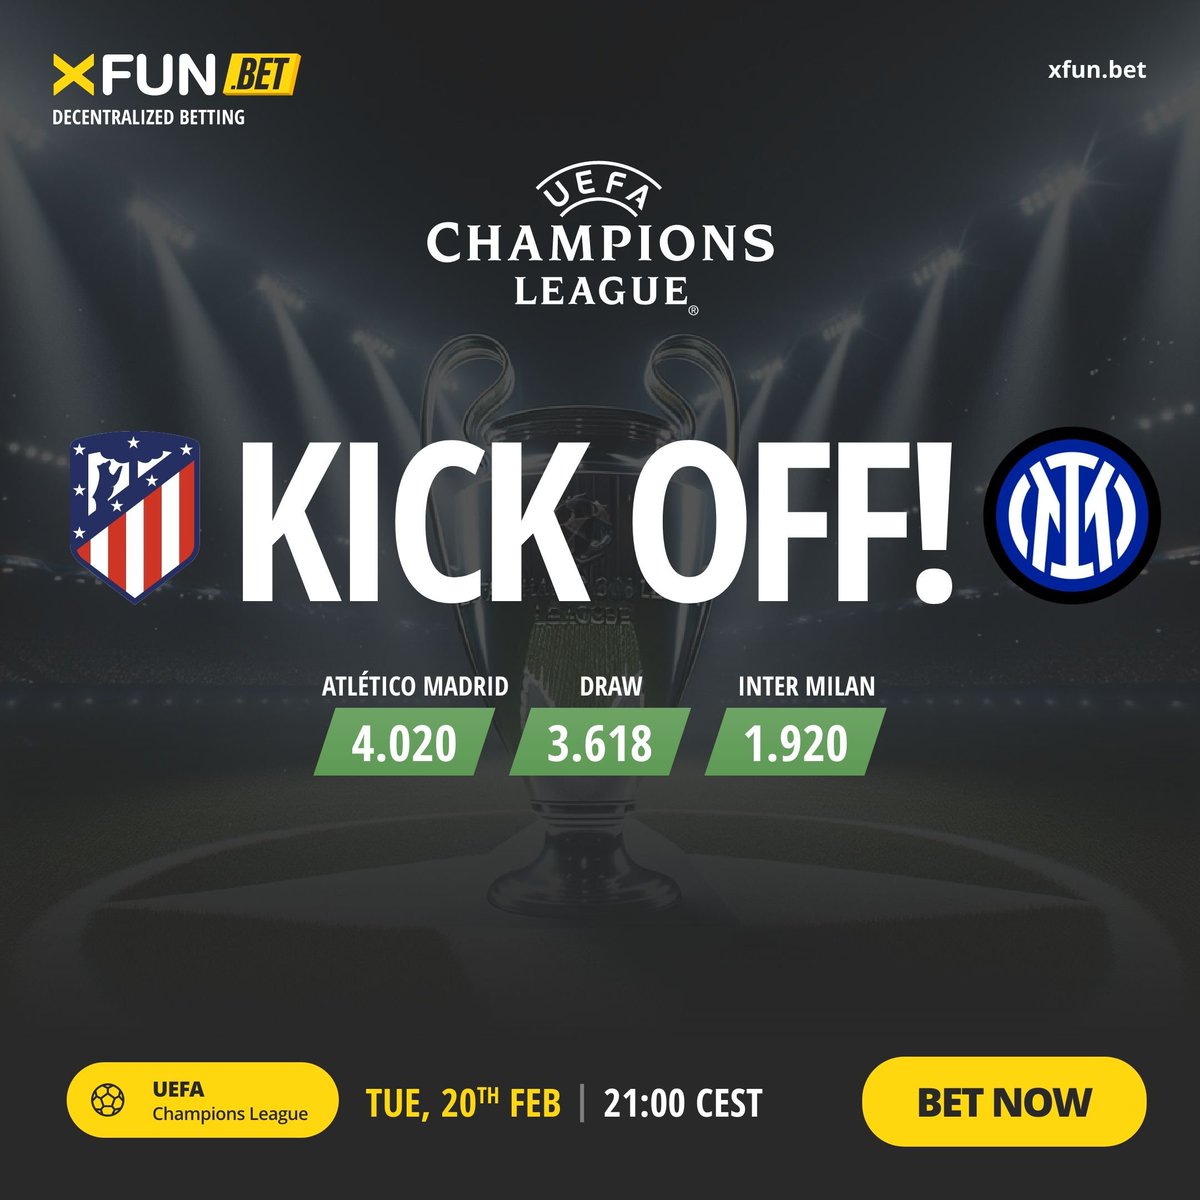 🌟 A clash of titans! Atlético Madrid 🆚 Inter Milan in a crucial Champions League match. Join the action at xfun.bet! #XFUNBet #EuropeanFootball #UCL ⚽💫